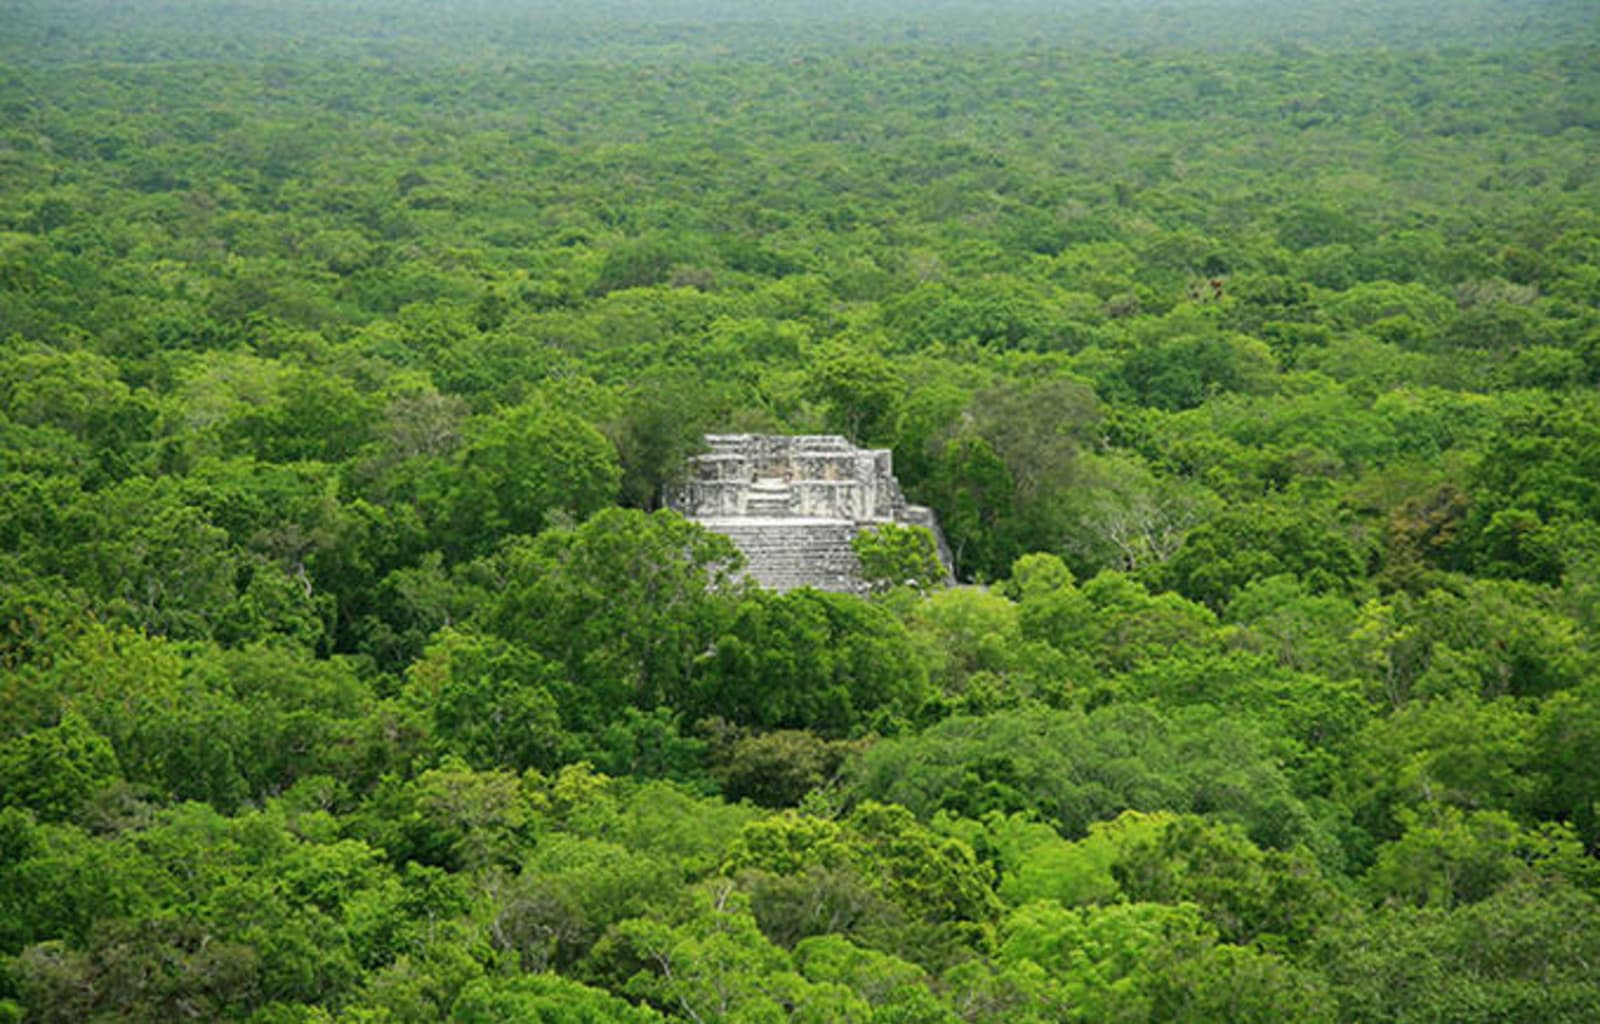 Calakmul - a remote ruin surrounded by lush green jungle, with no discernible entrance